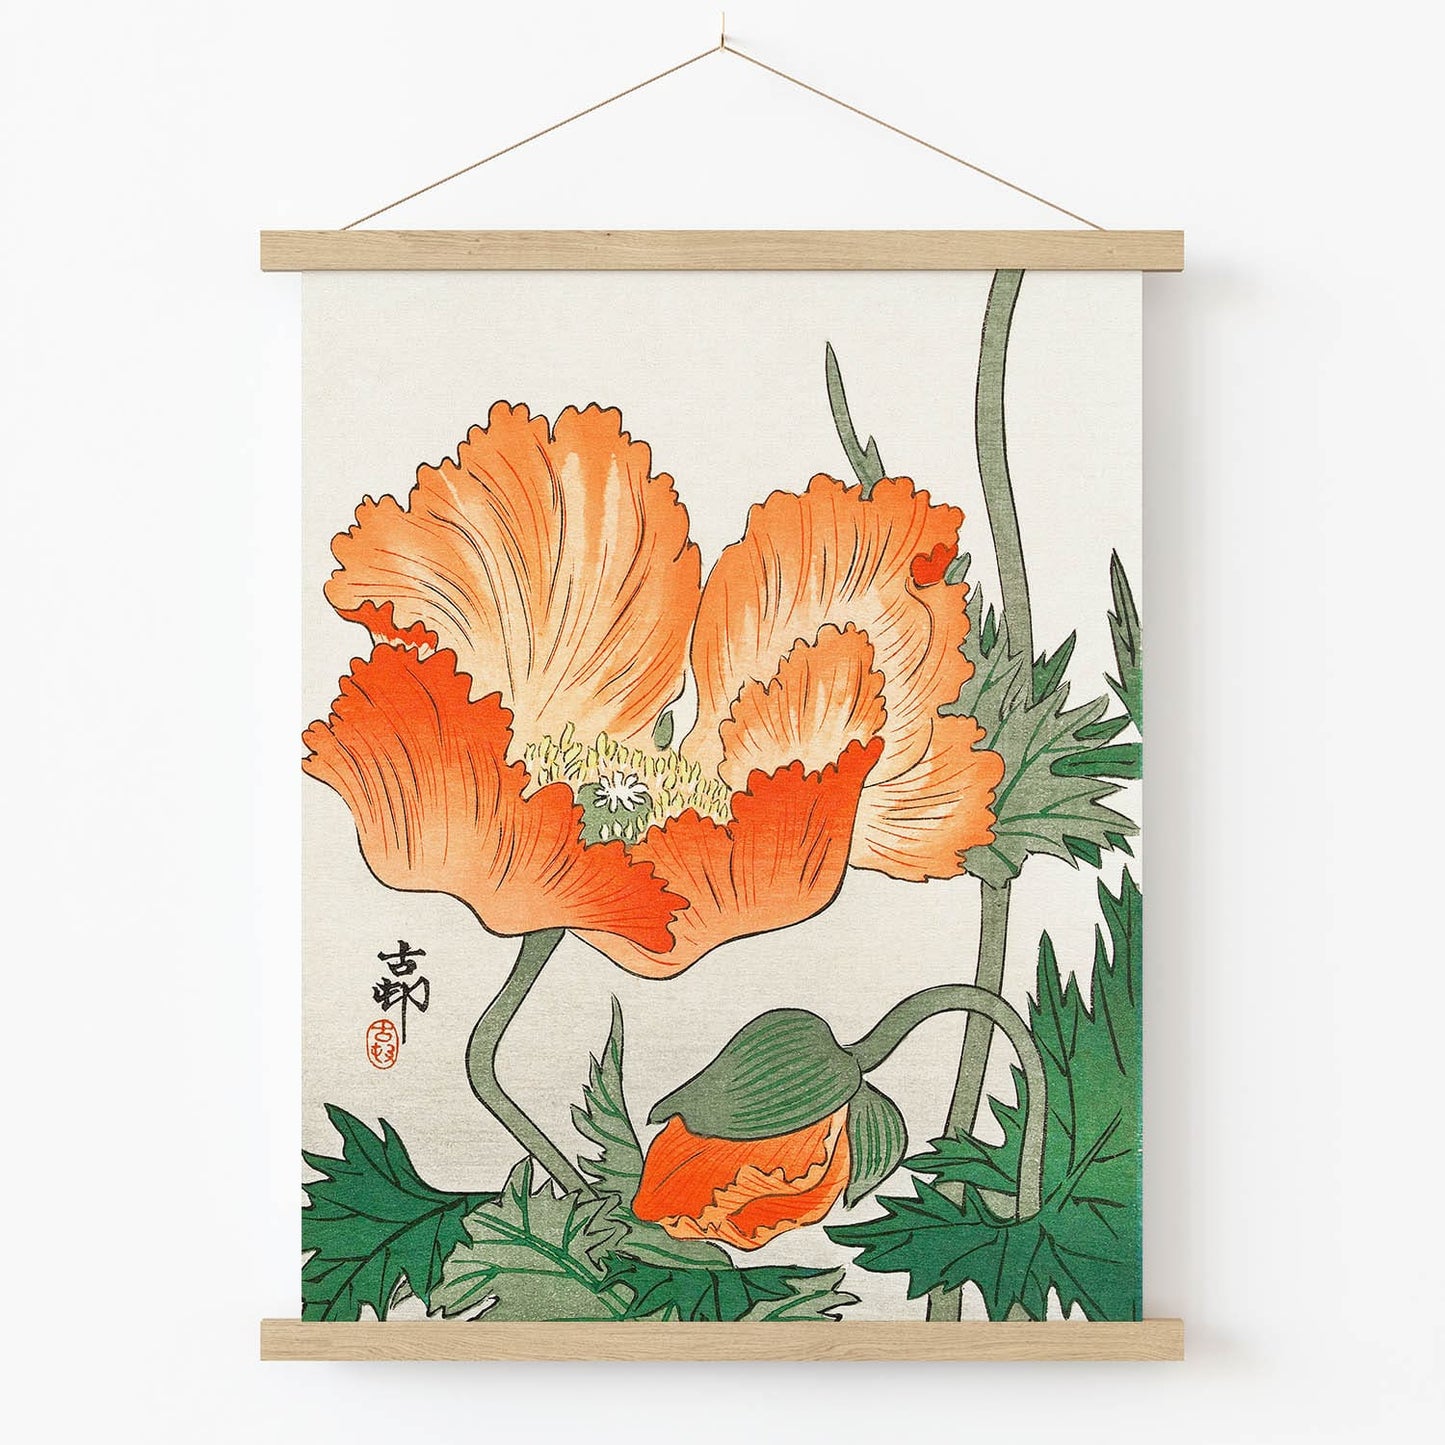 Uplifting Floral Art Print in Wood Hanger Frame on Wall